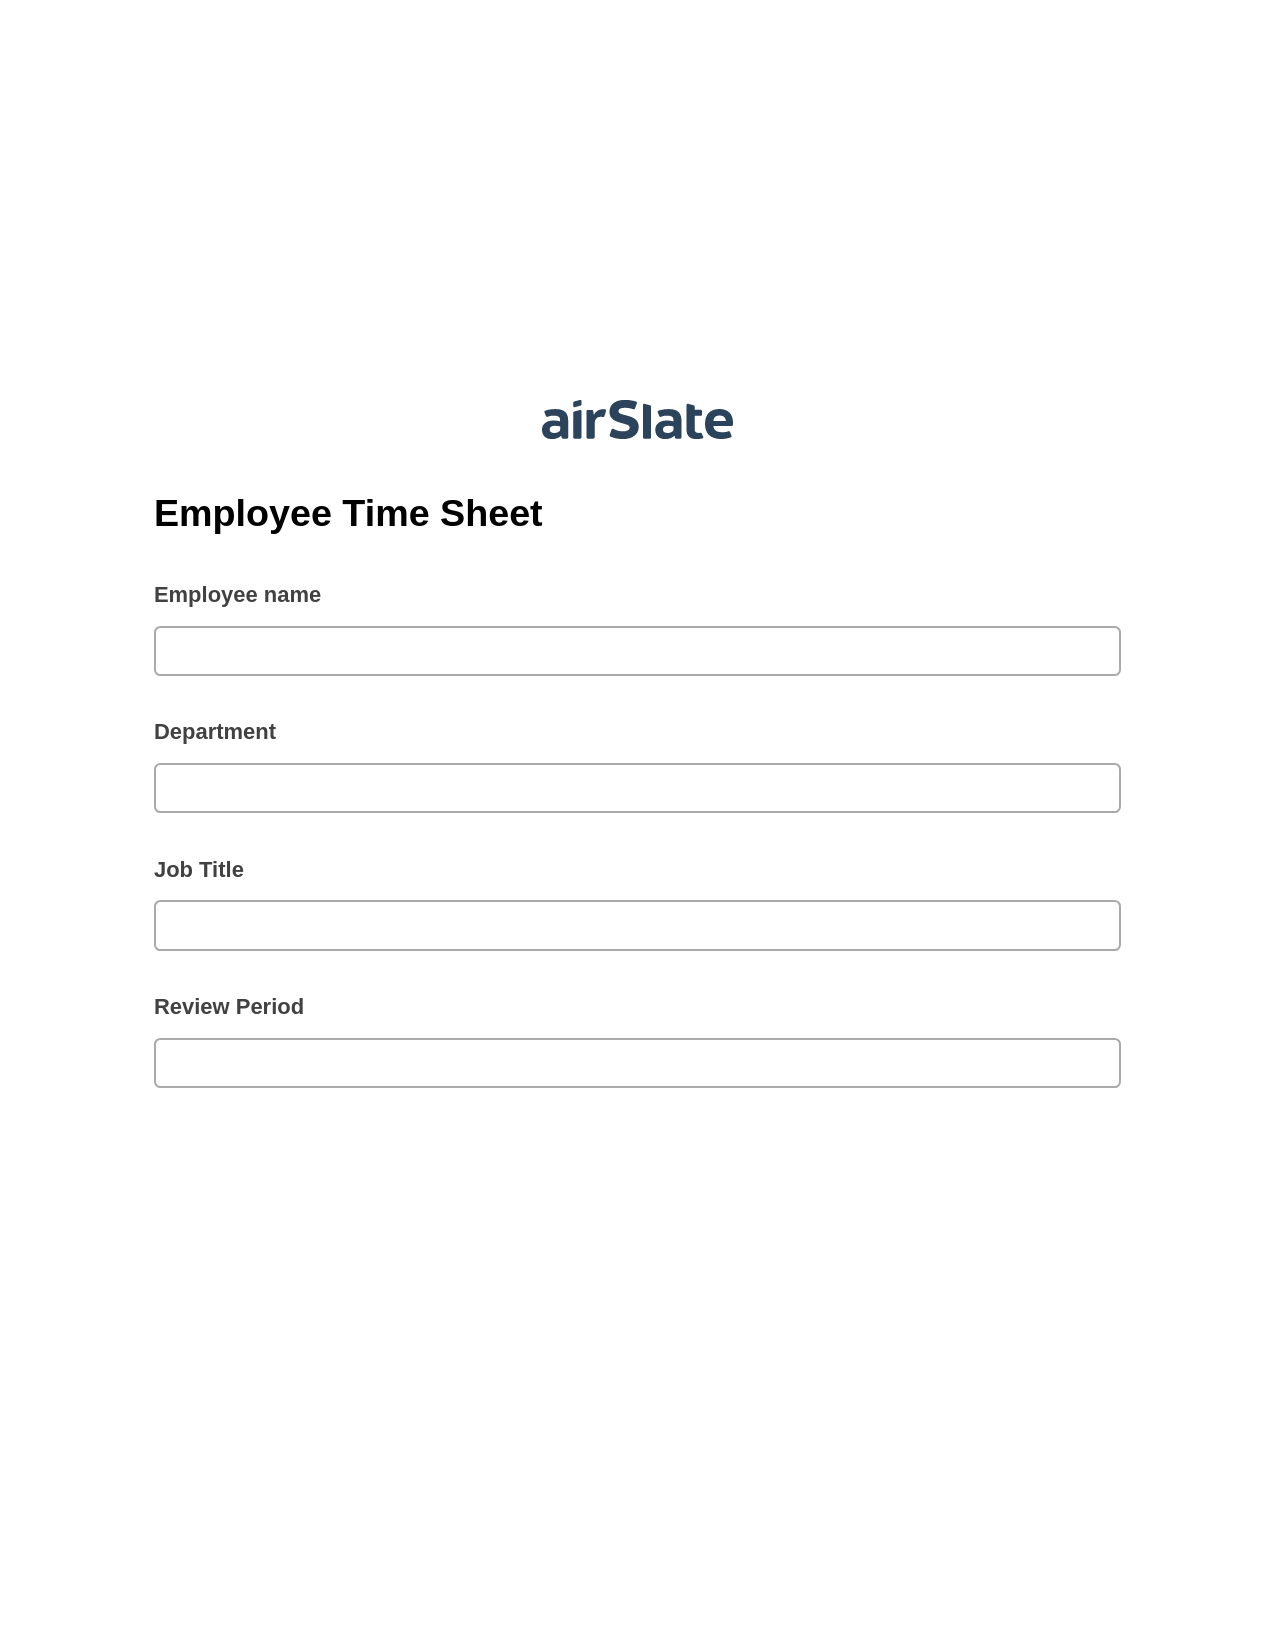 Employee Time Sheet Pre-fill from Salesforce Records Bot, Create slate addon, Export to Excel 365 Bot